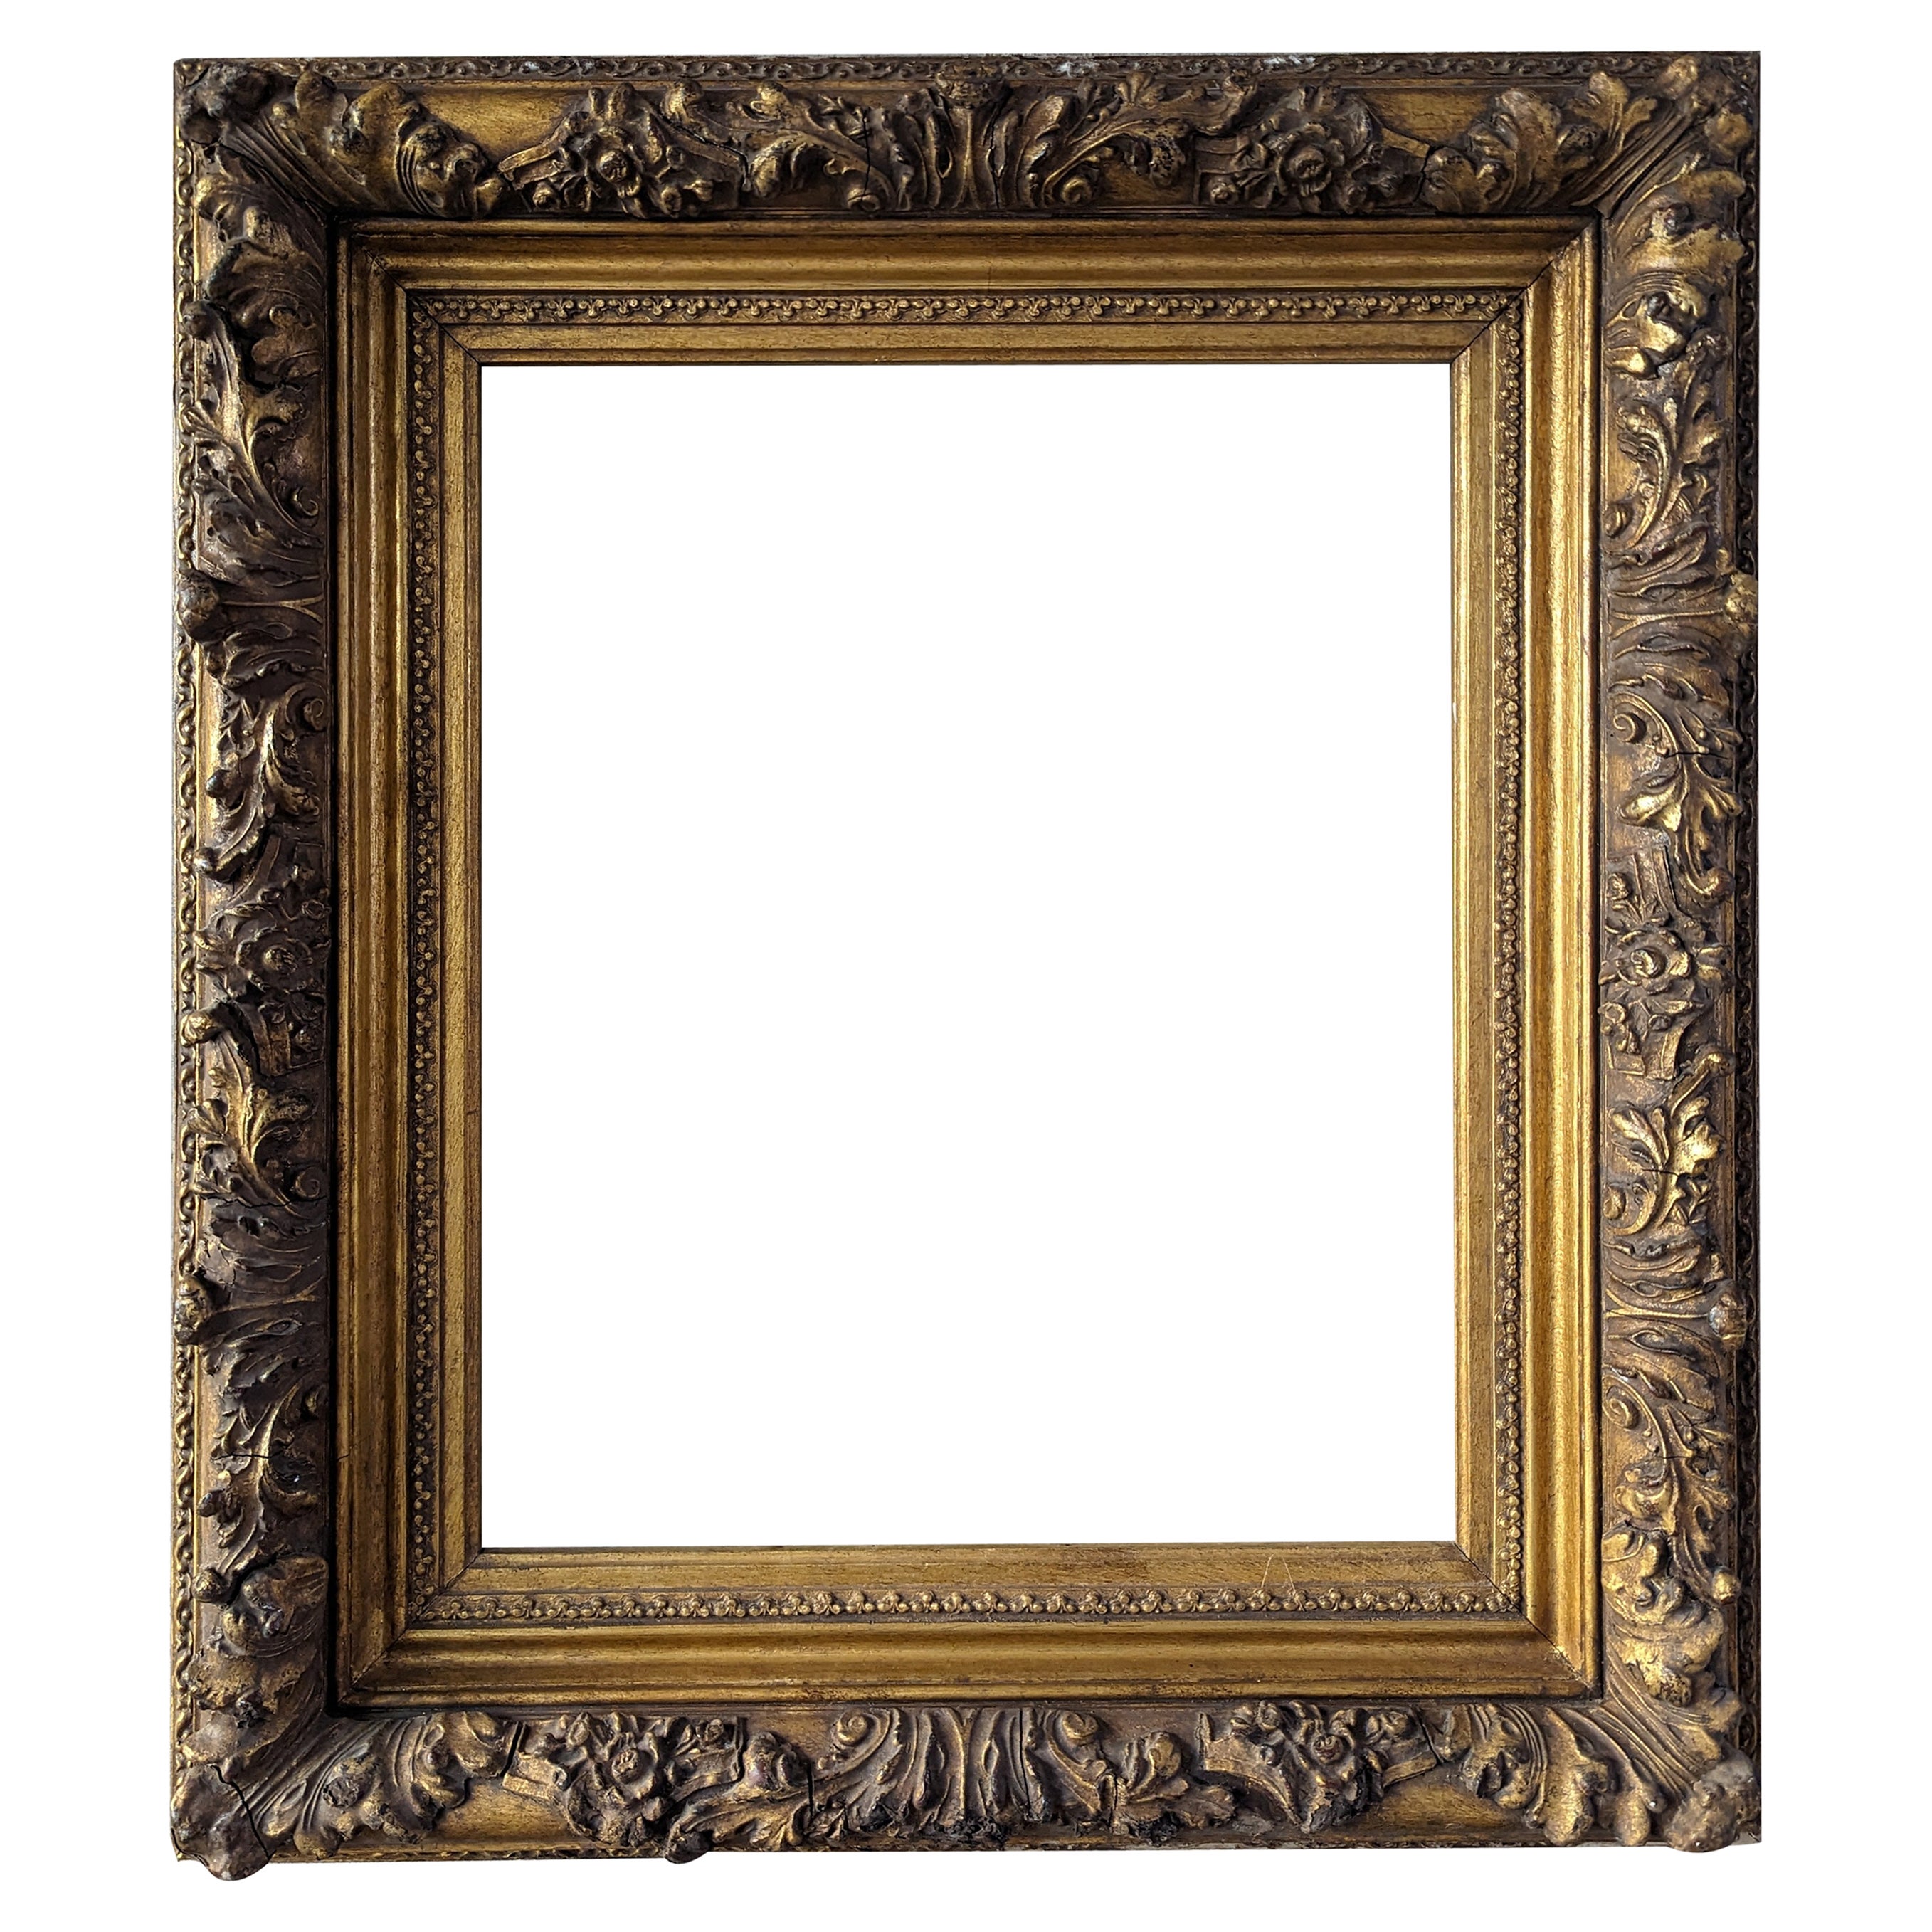 Large Frame with Floral Motifs and Acanthus